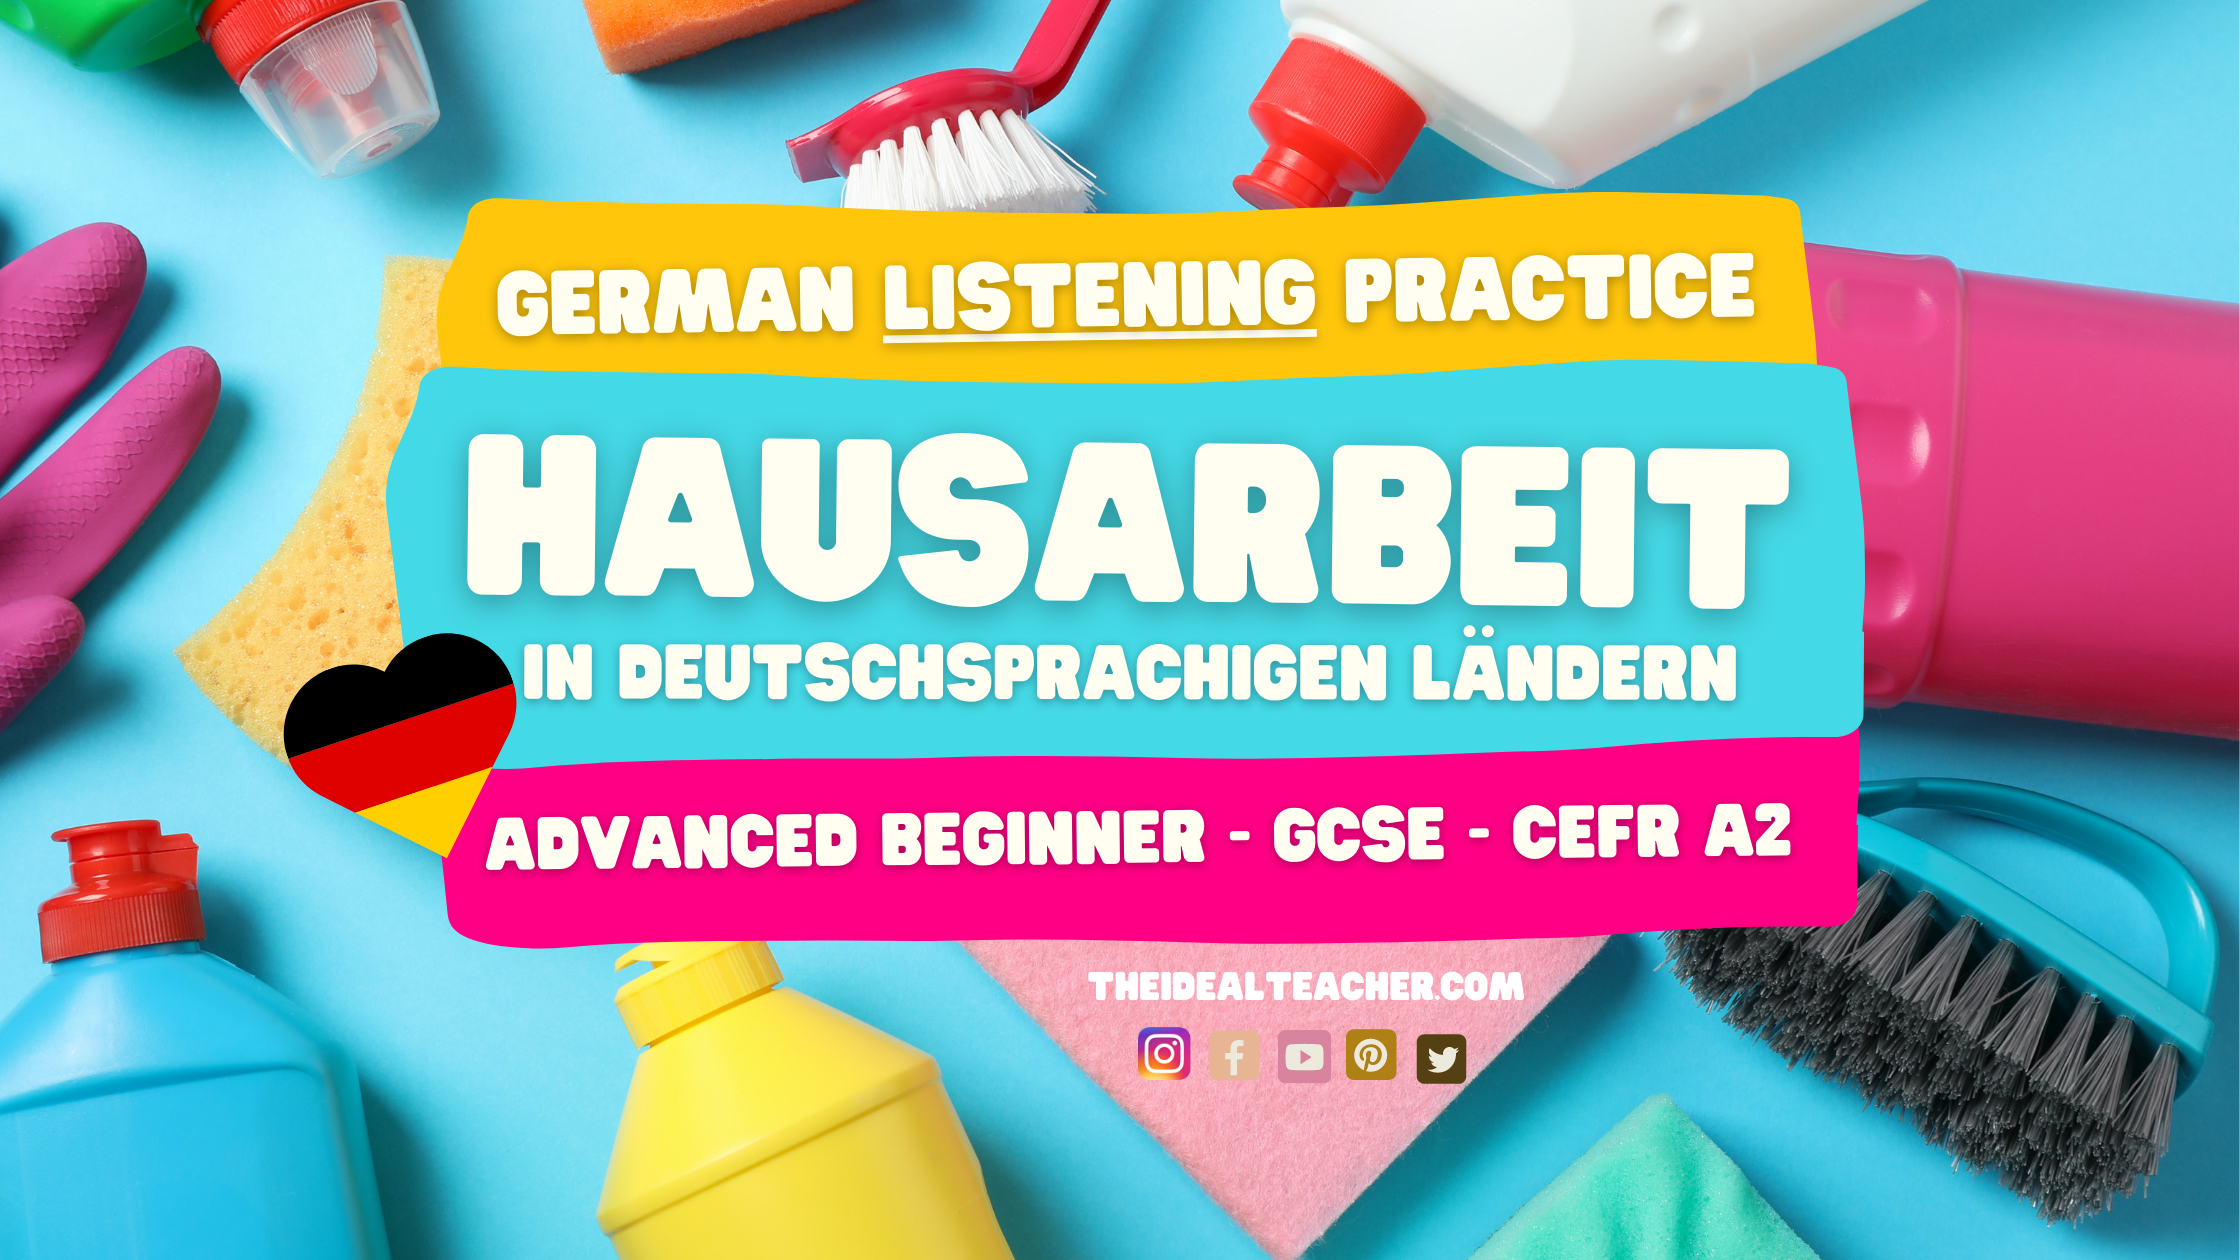 Hausarbeit – Free German Listening Practice For A2 and GCSE